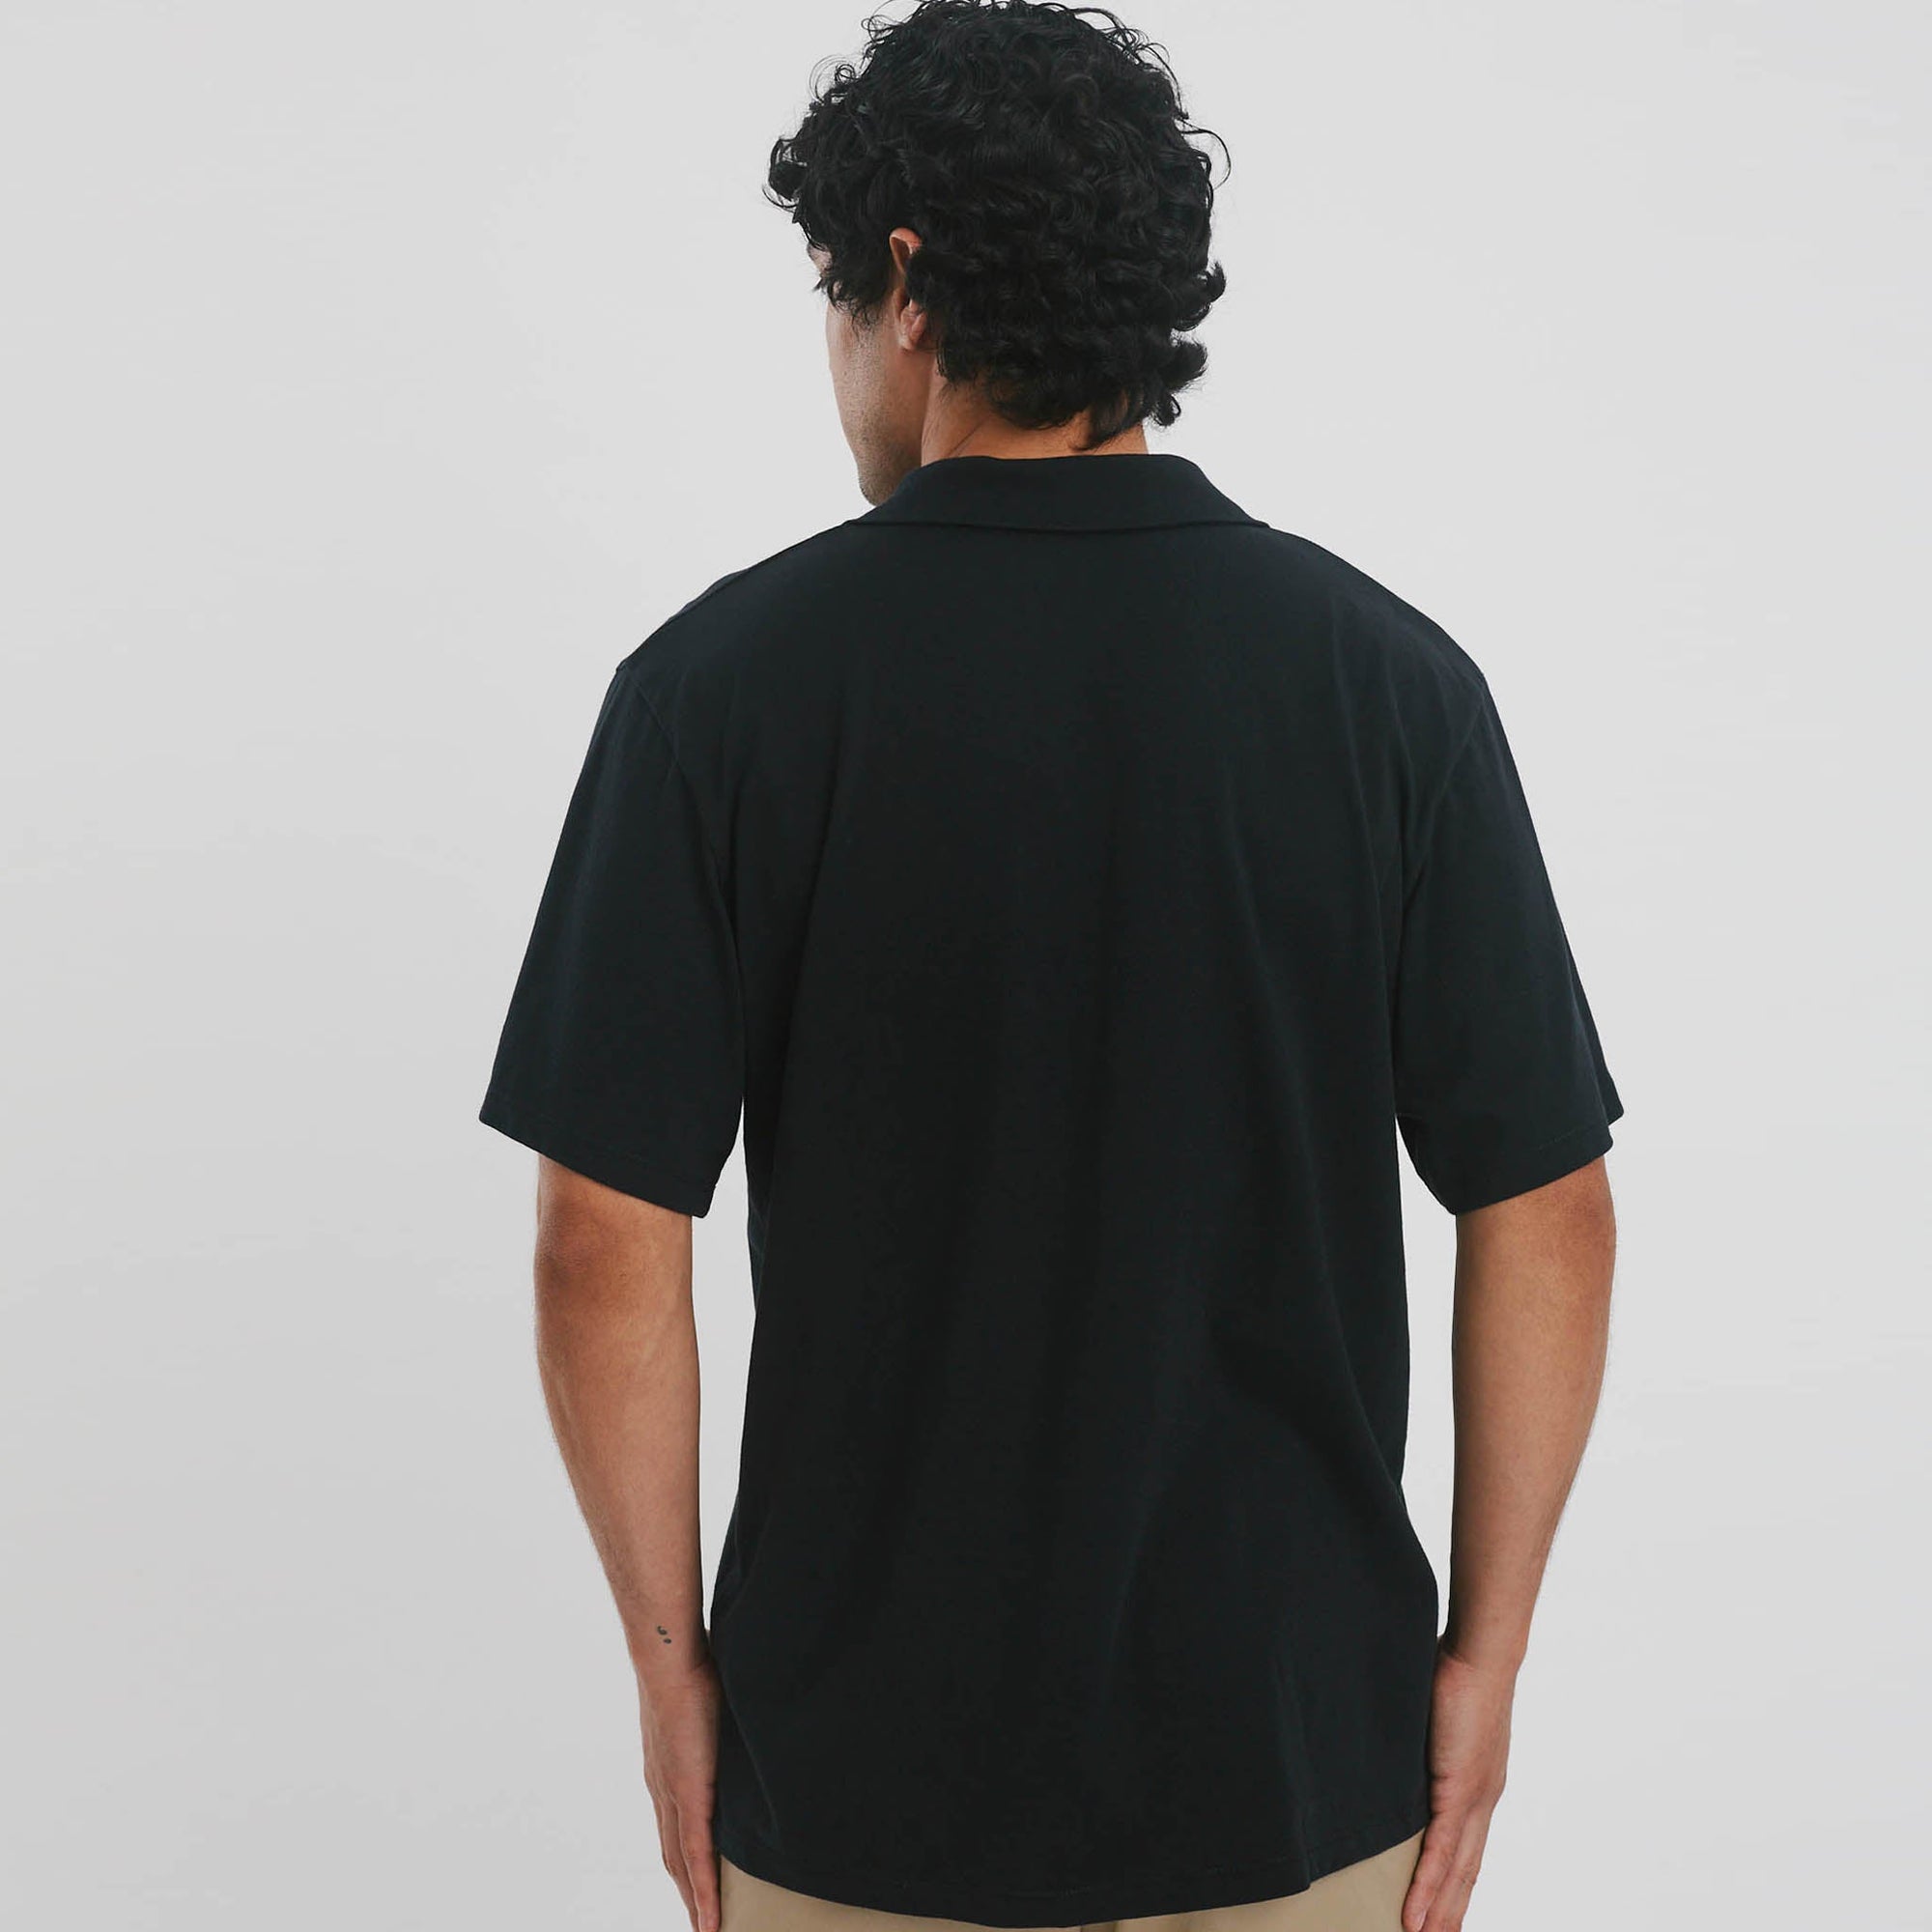 The Comfy Polo Shirt-Mens. No tags, no lables. The Shapes United.